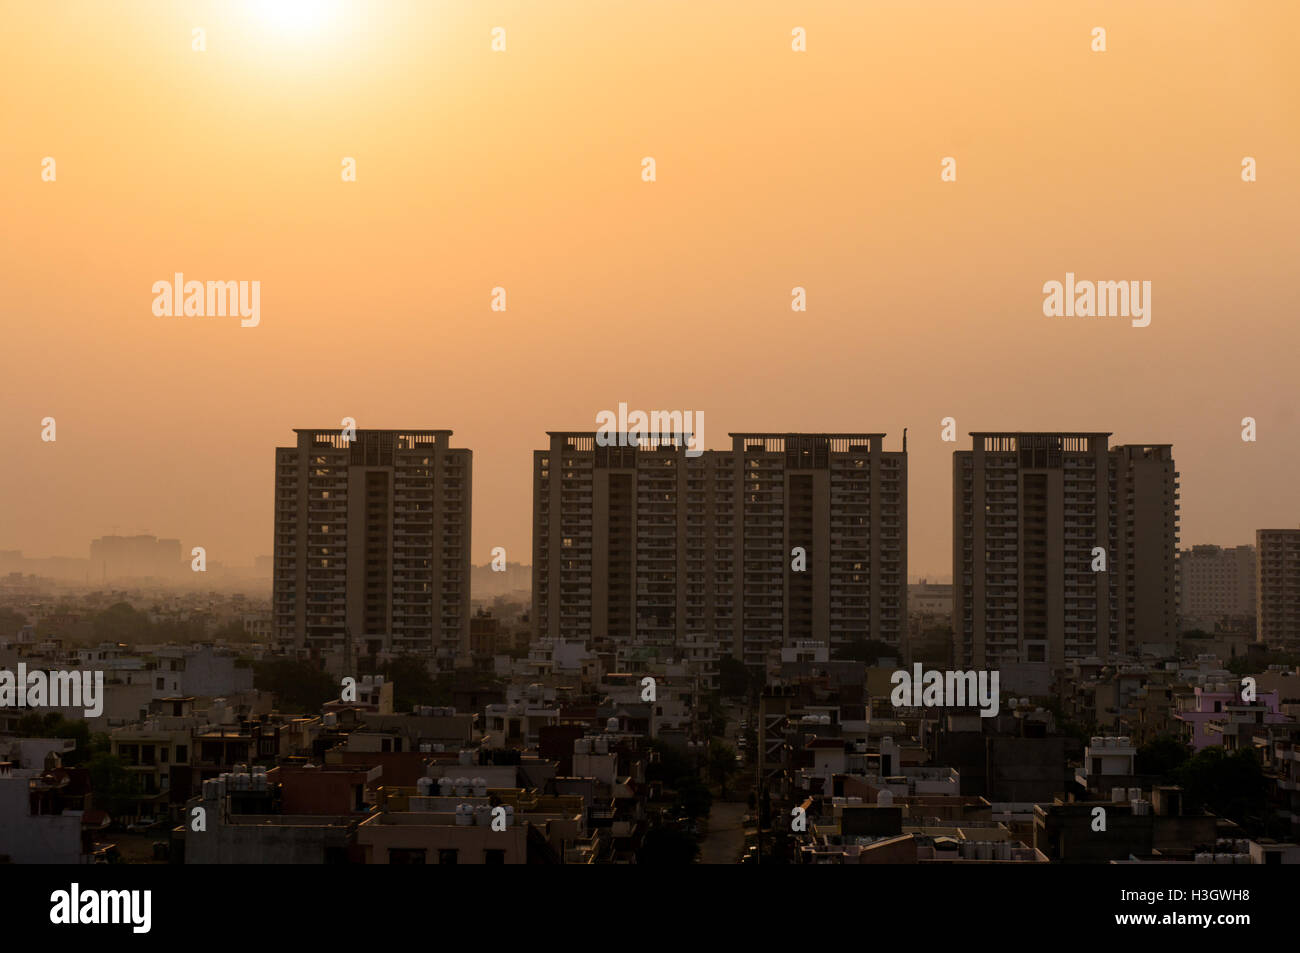 Dawn over gurgaon delhi showing the buildings in various stages of construction. The development of the city has led to a boom in infrastructure projects Stock Photo